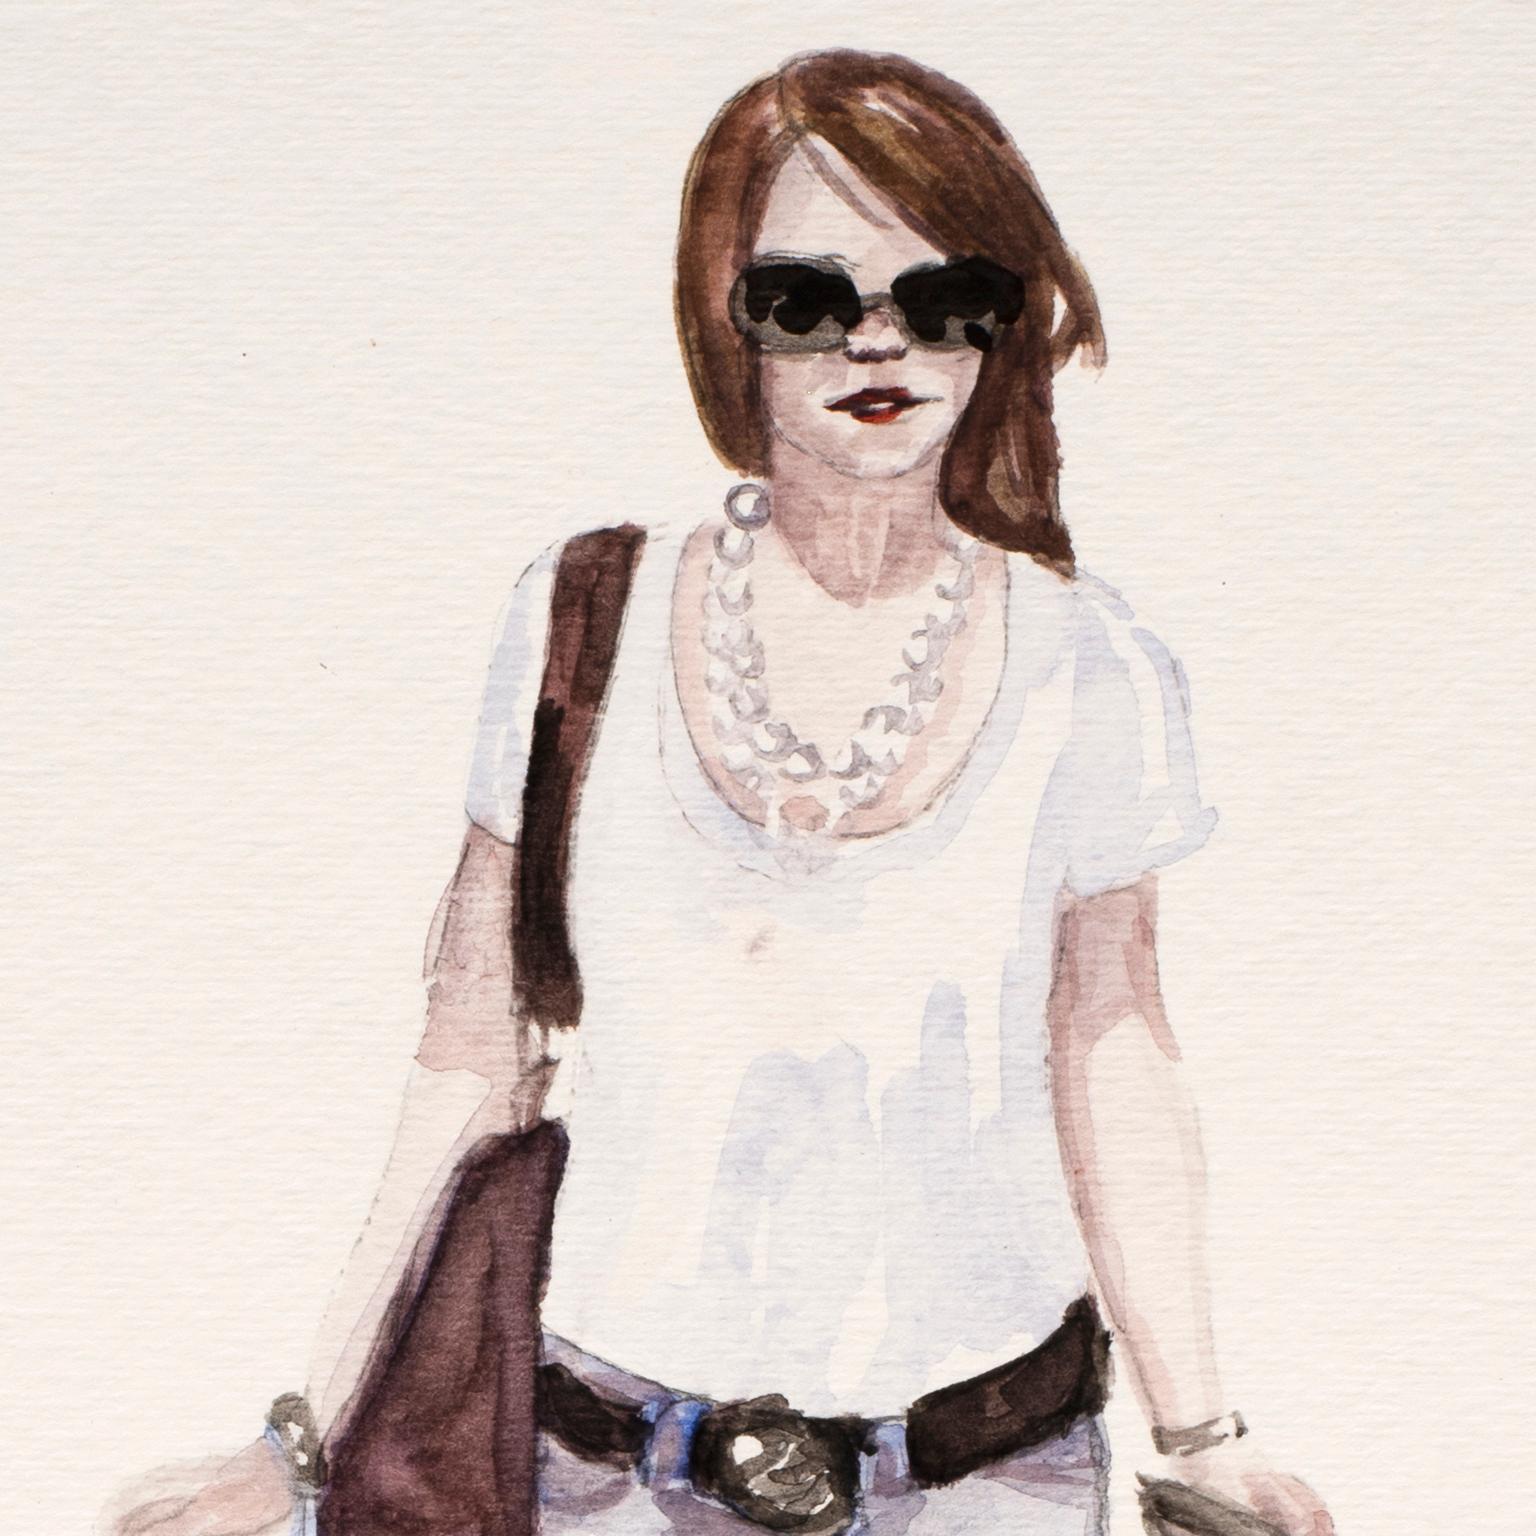 Courtney Incognito 020 by Courtney Miles, 2008. 
Original gouache and graphite on paper. 
11 x 8 inches Unframed
Redhead with brown knee high boots and a blue shopping bag

Courtney Miles originally did 100 works for the Courtney Incognito series in